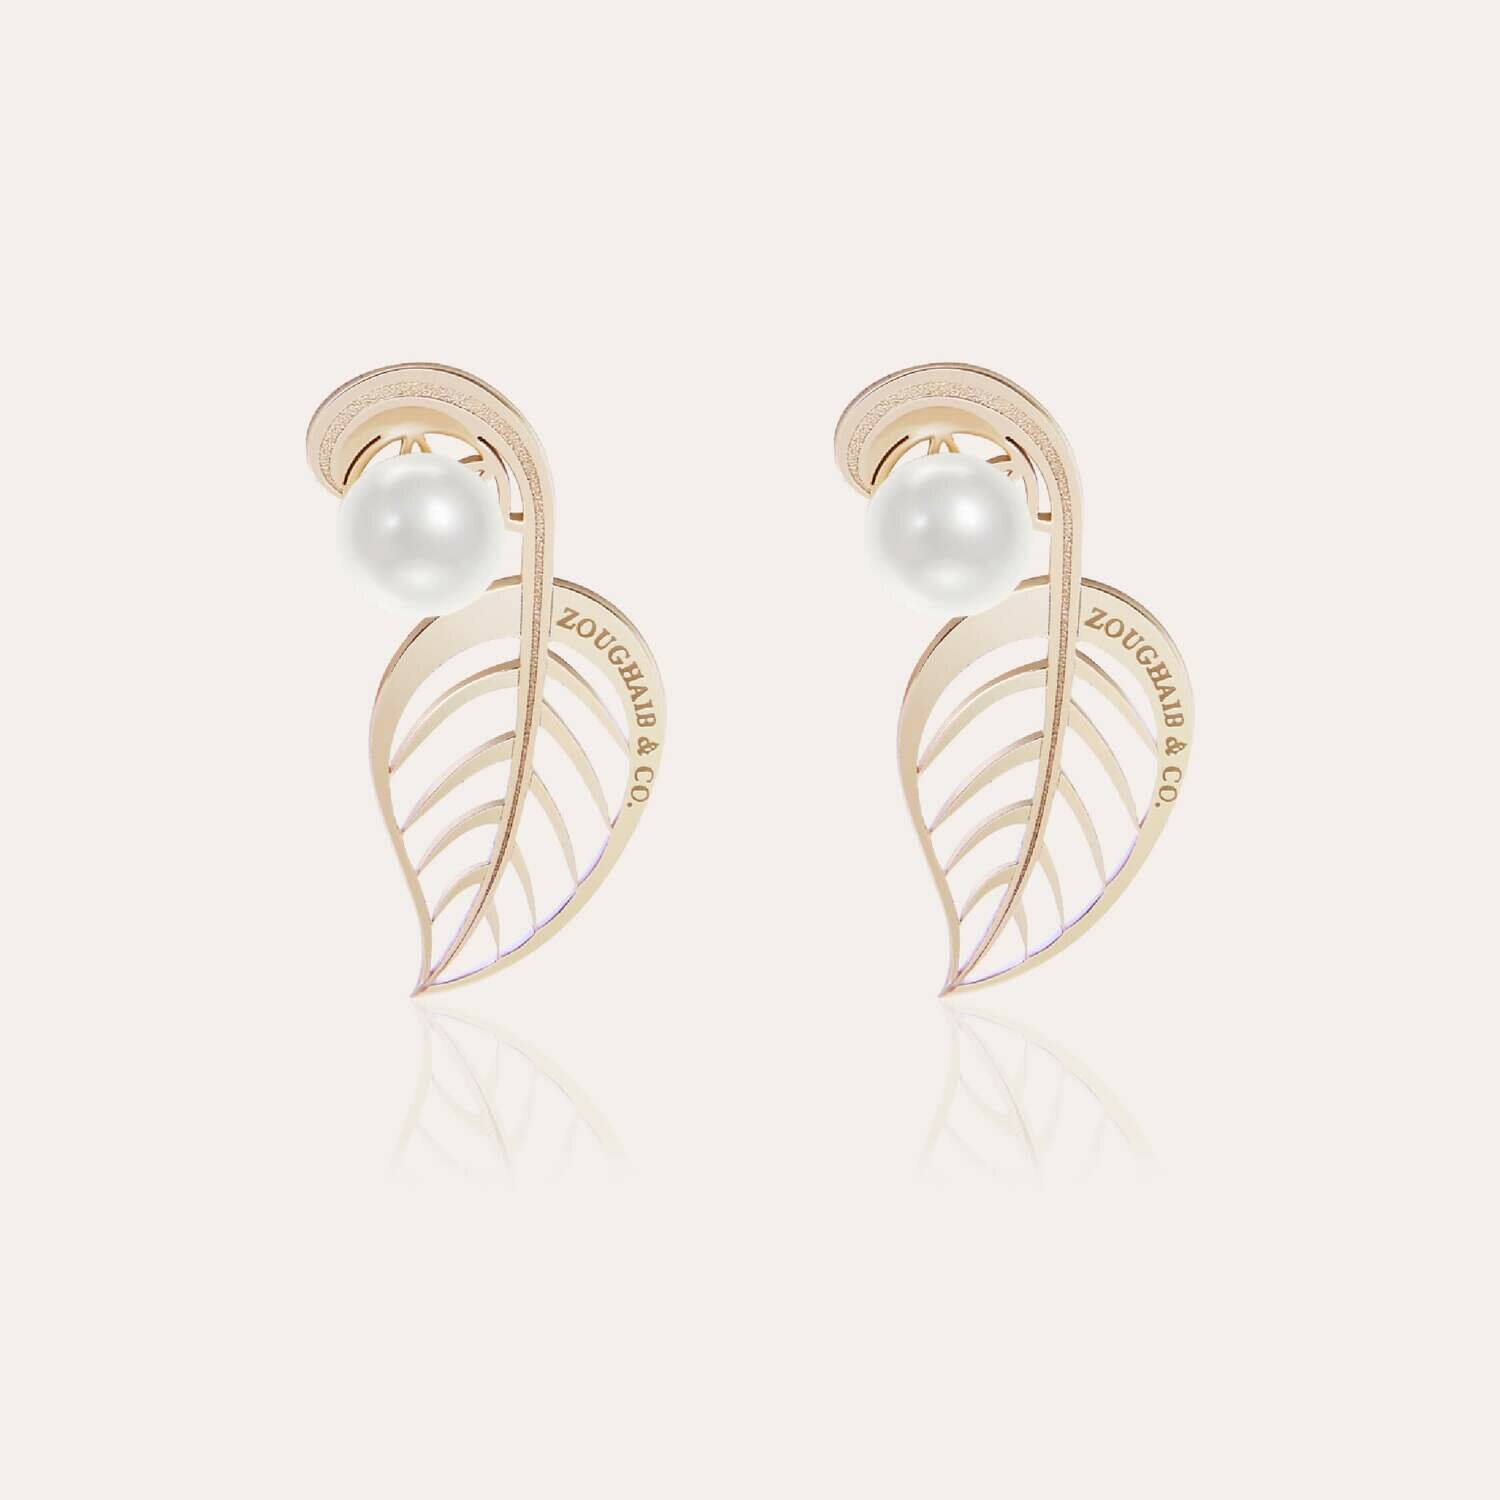 Leaves Gold Earrings with Pearl